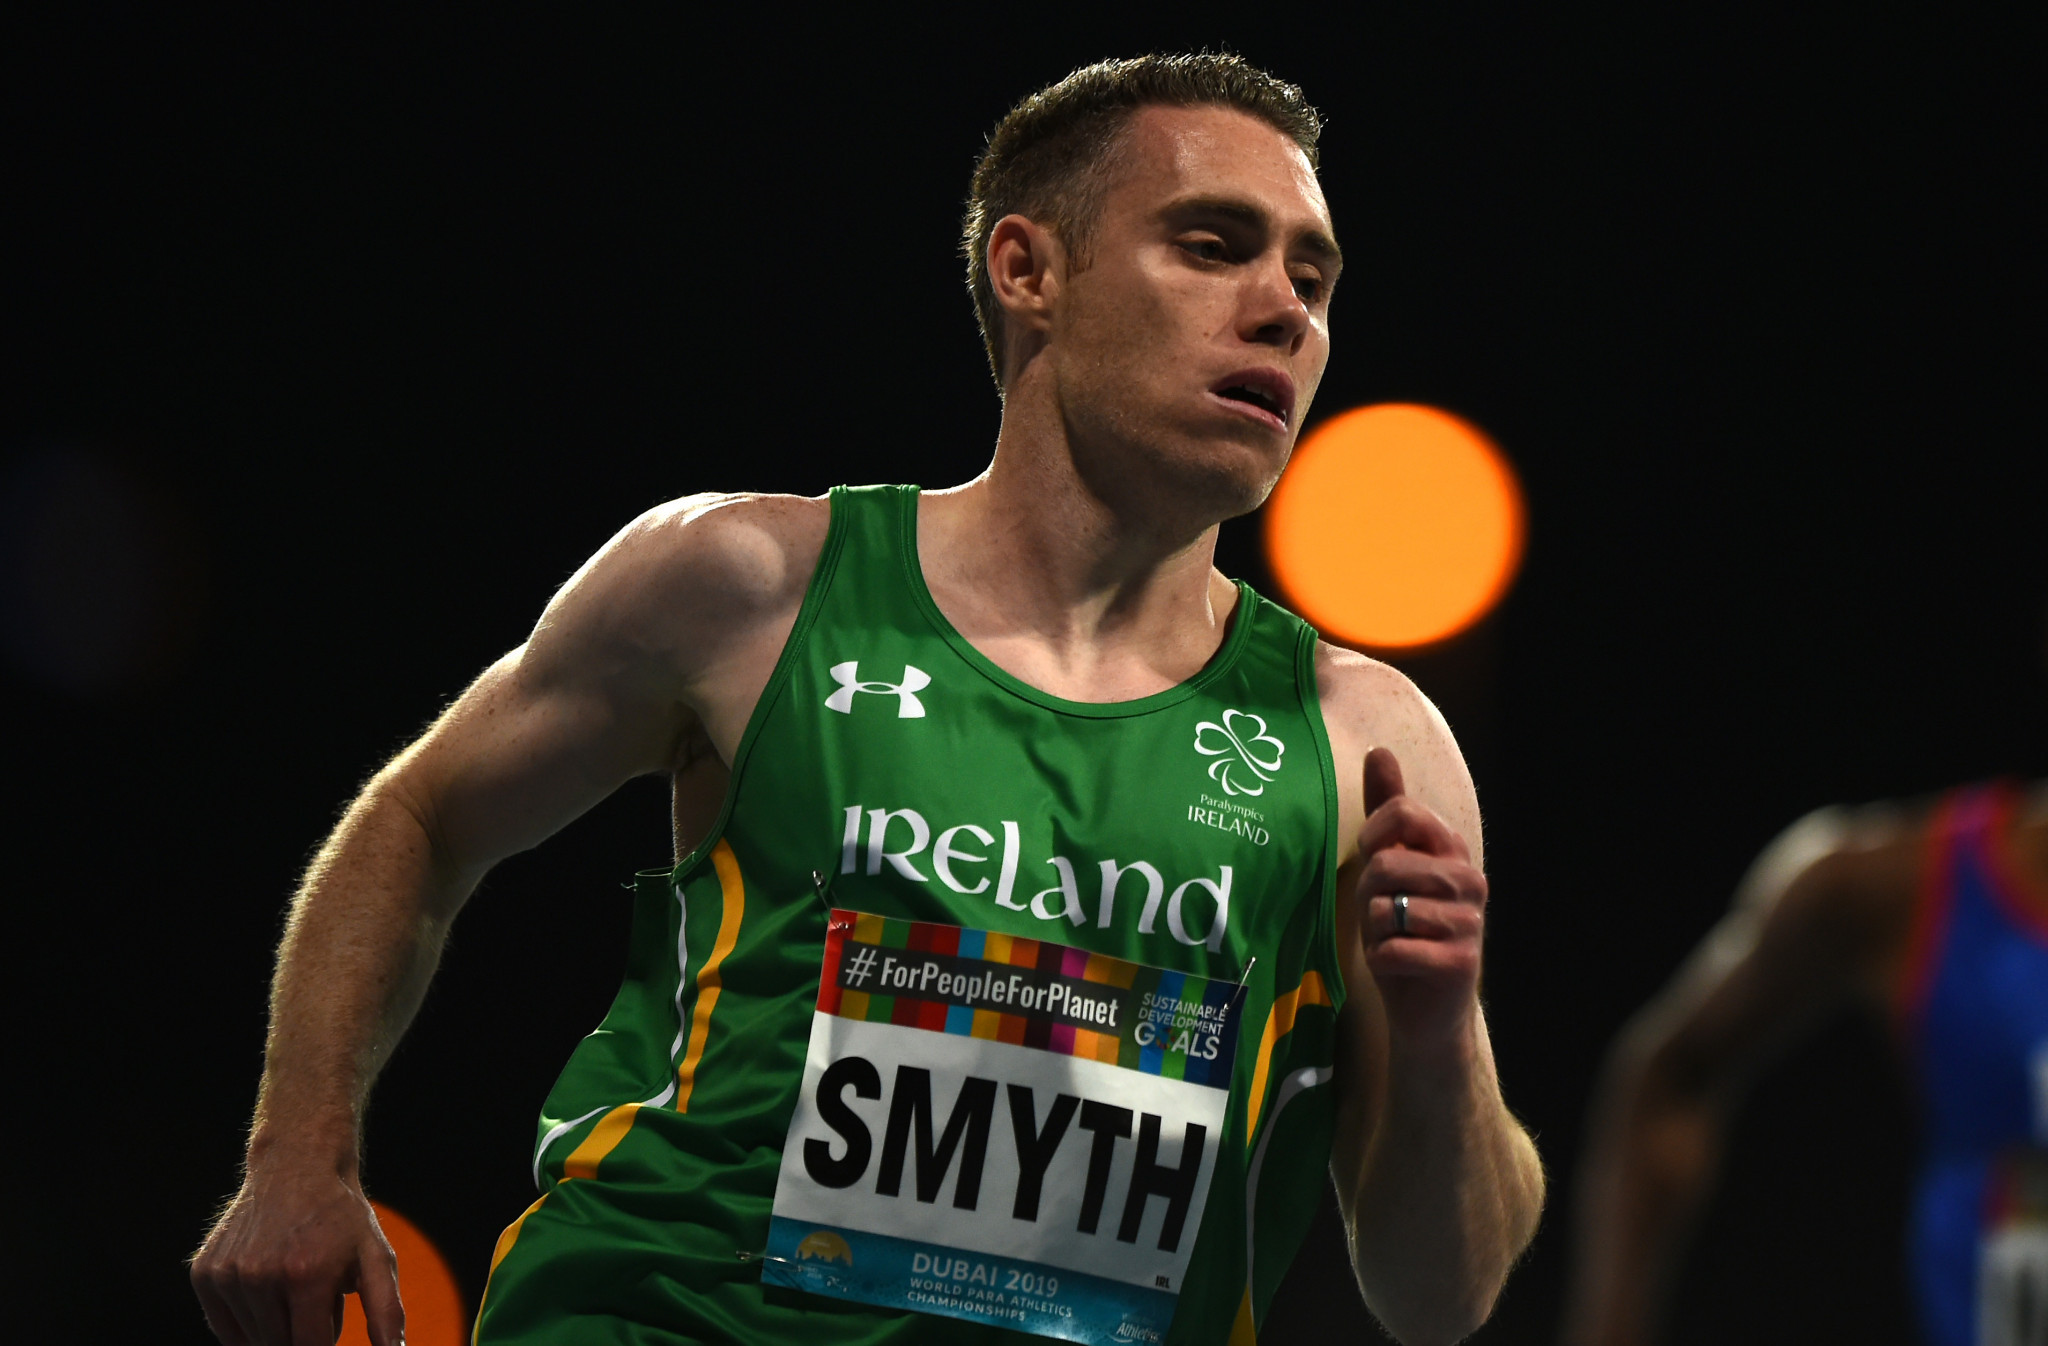 Jason Smyth says "recognition not the same" for Irish Paralympians